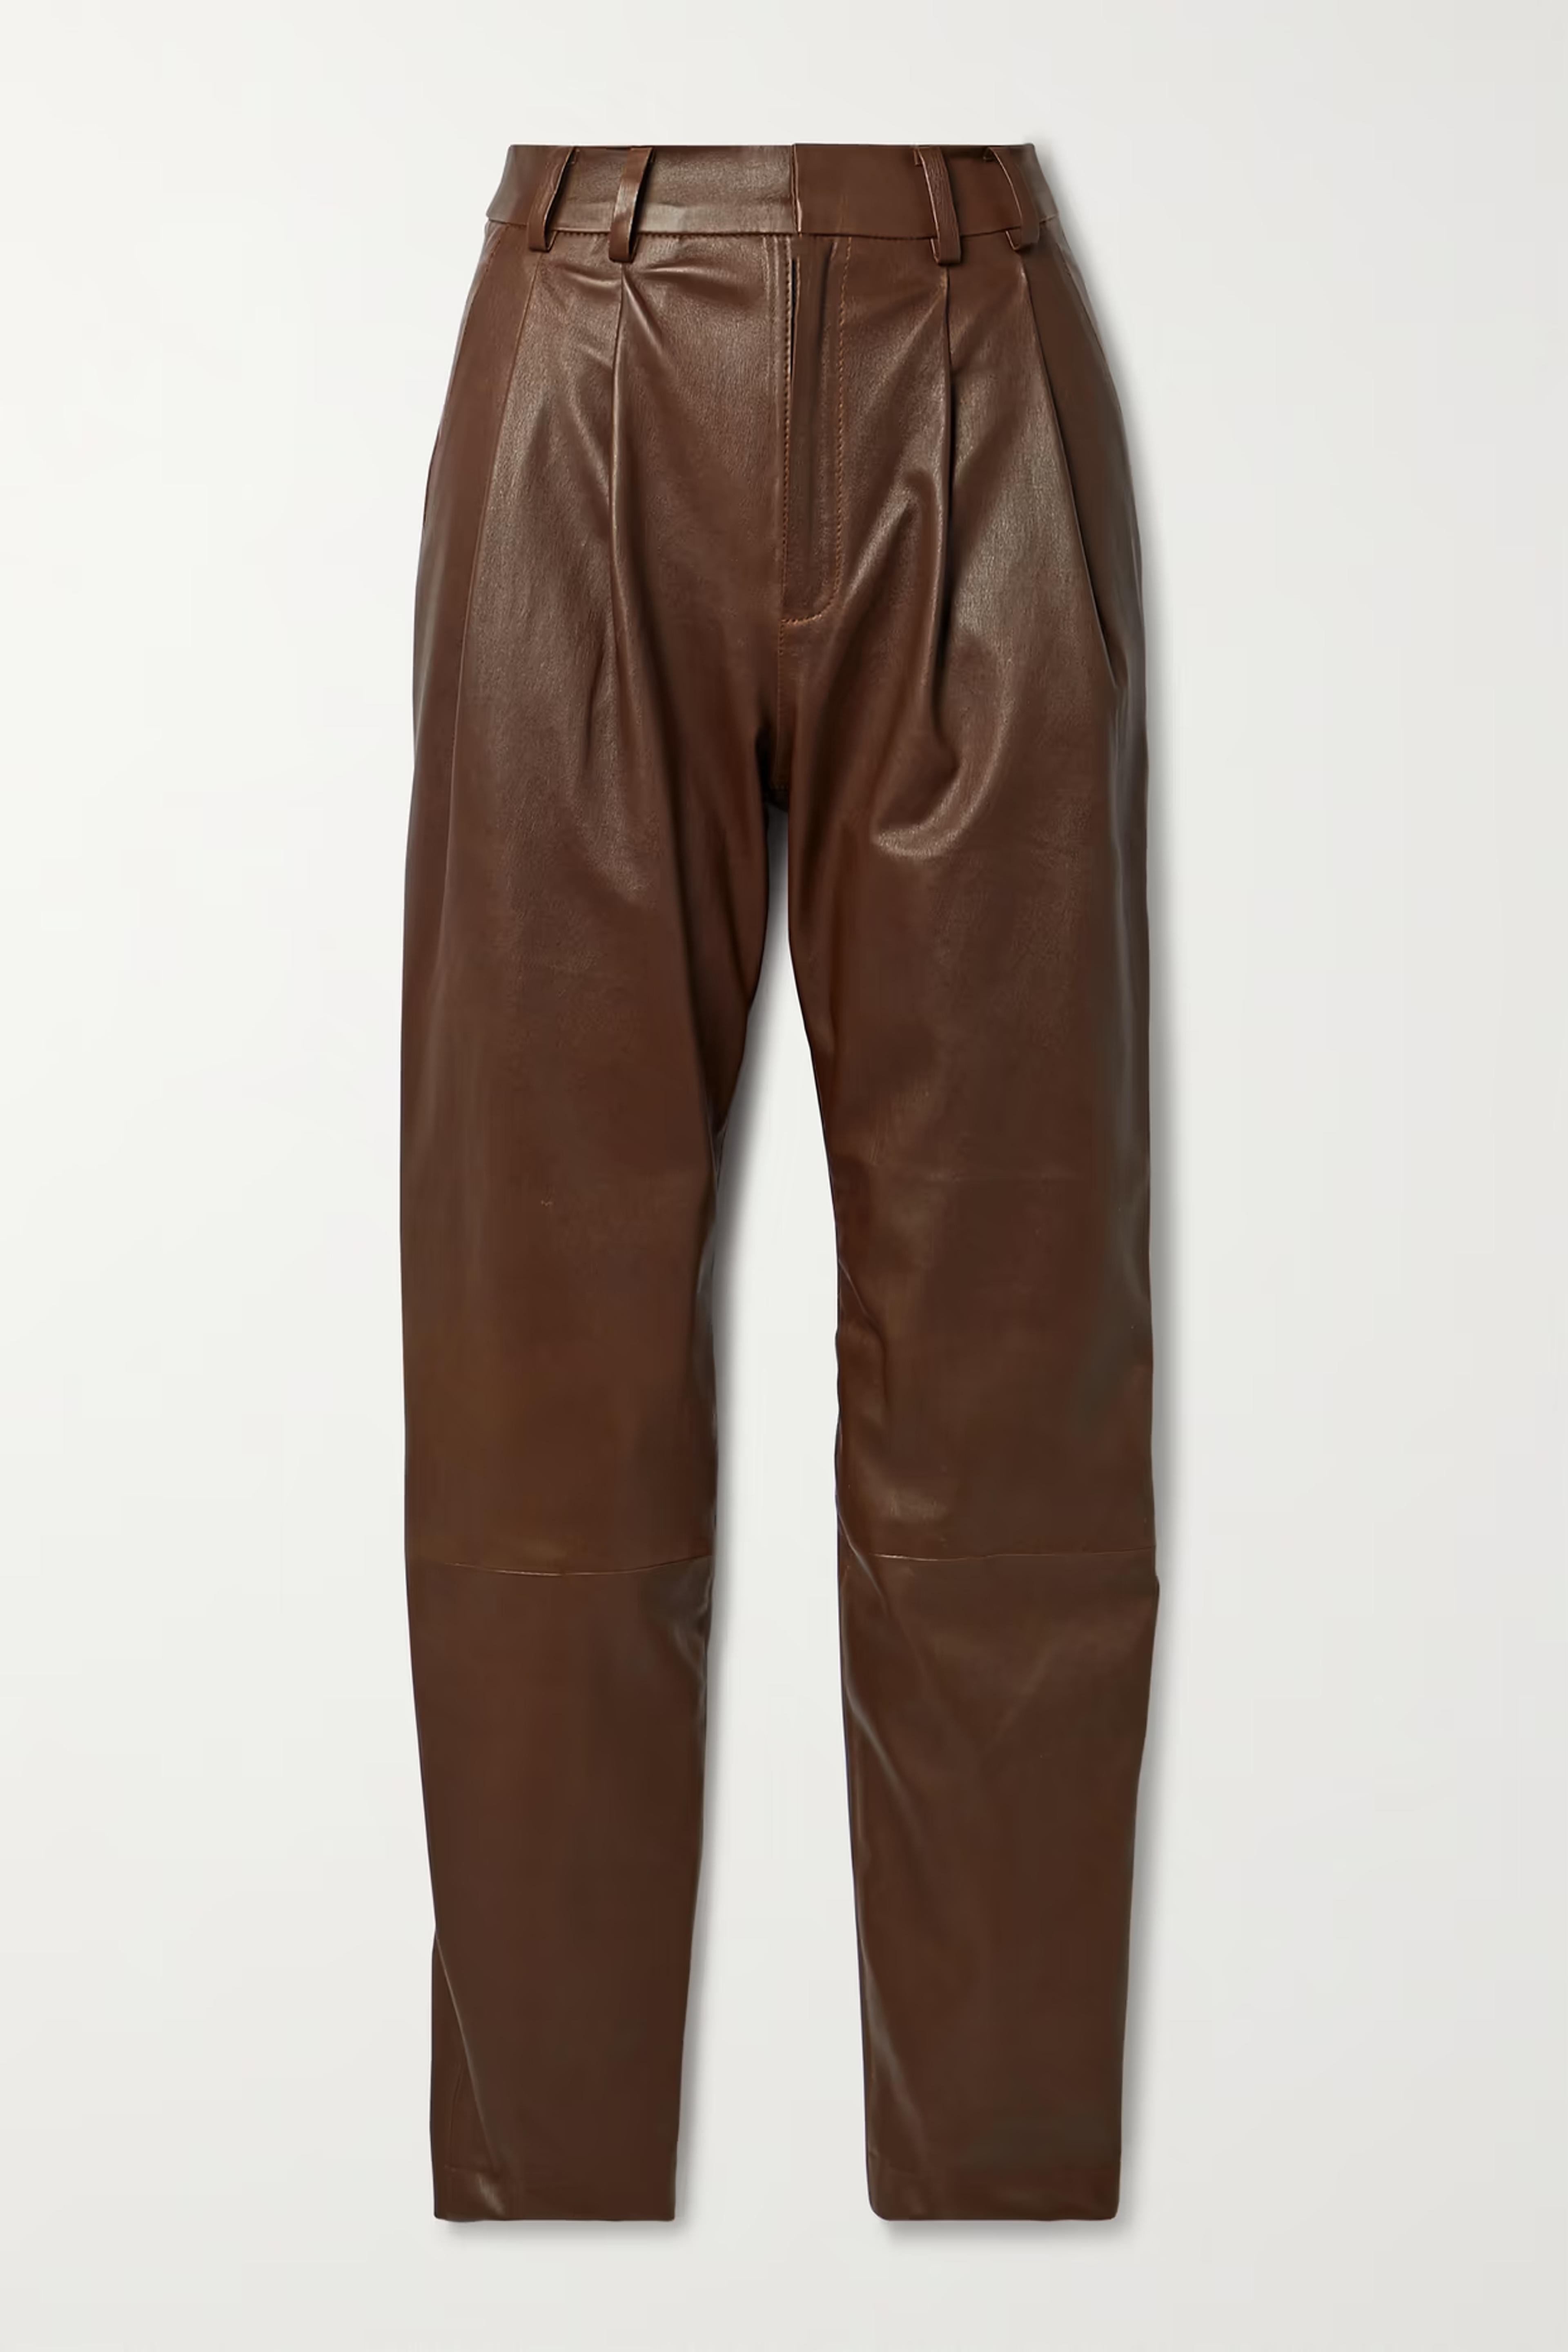 SPRWMN - Pleated leather tapered pants